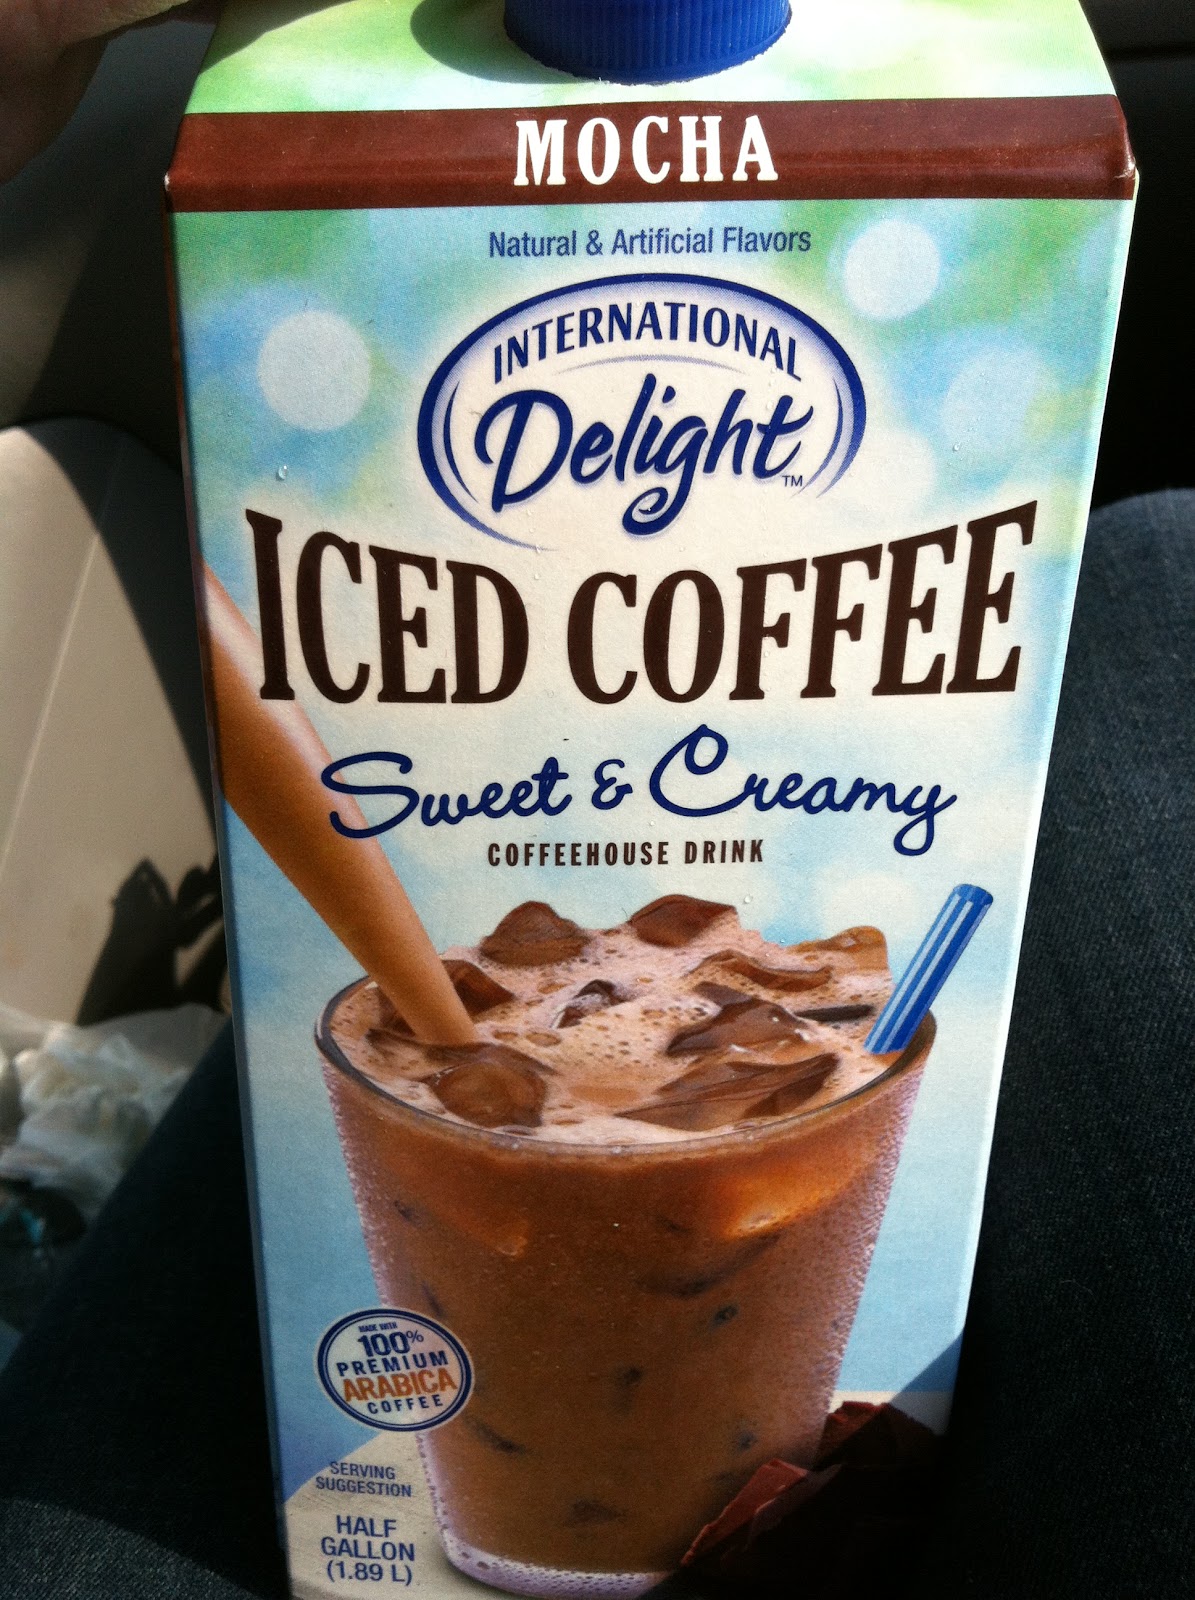 The International Delight Iced